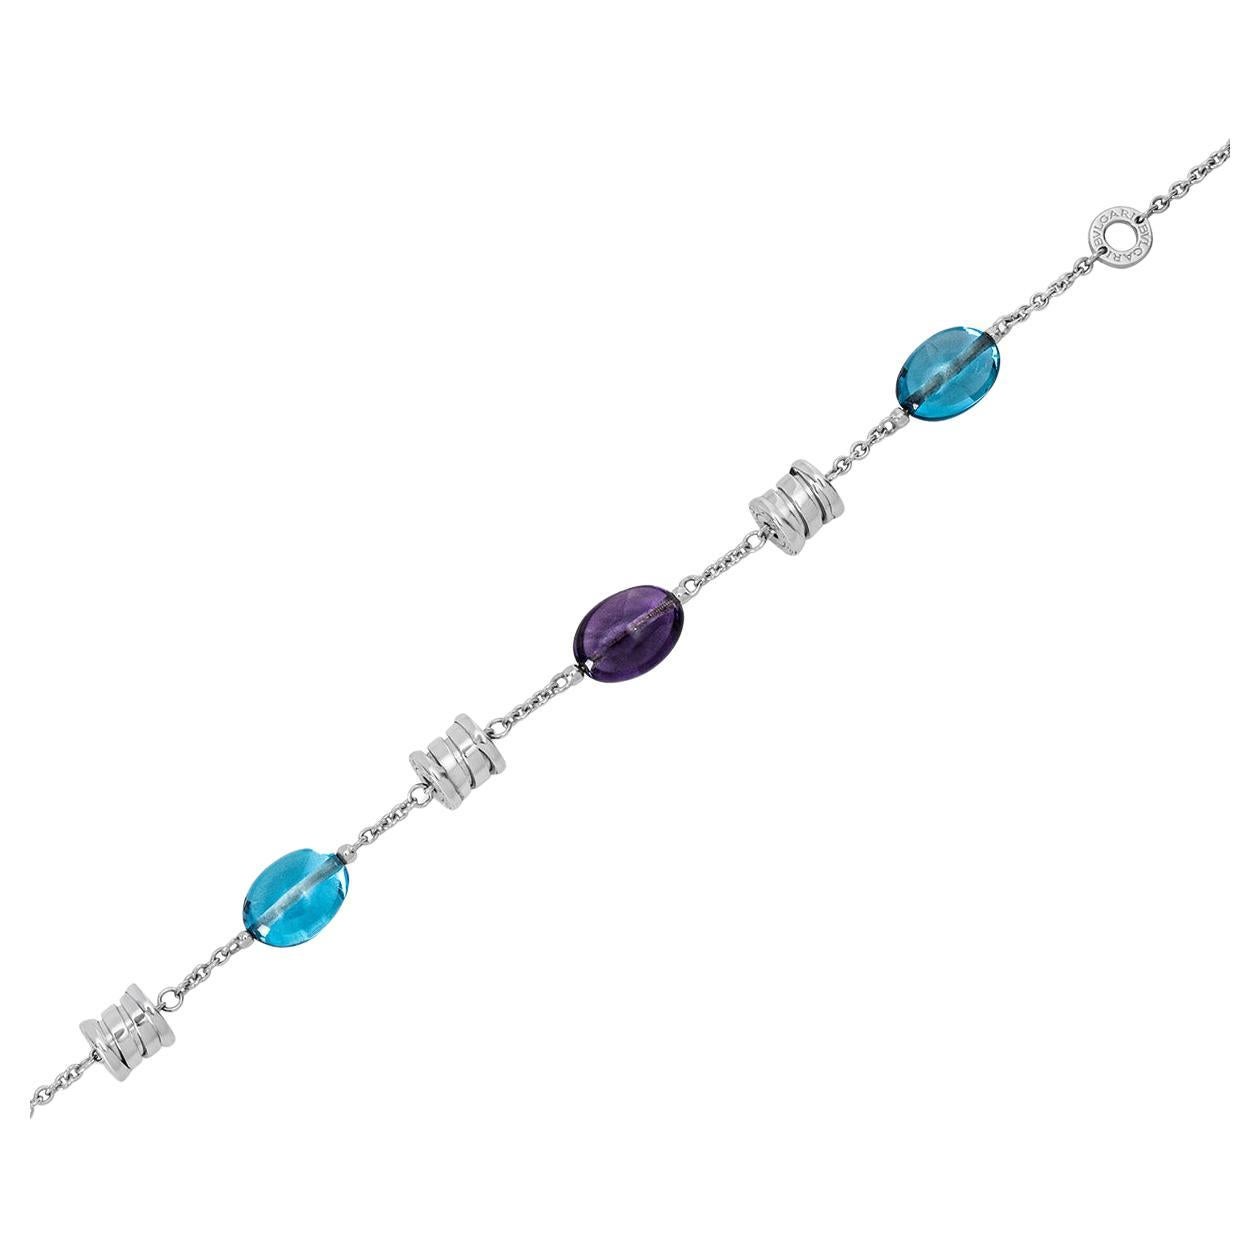 A chic 18k white gold multi-gem bracelet by Bvlgari from the B.zero1 collection. The bracelet comprises of two amethyst and two topaz beads alternating with three 'Bvlgari Bvlgari' barrels. The bracelet features a lobster clasp and has an adjustable